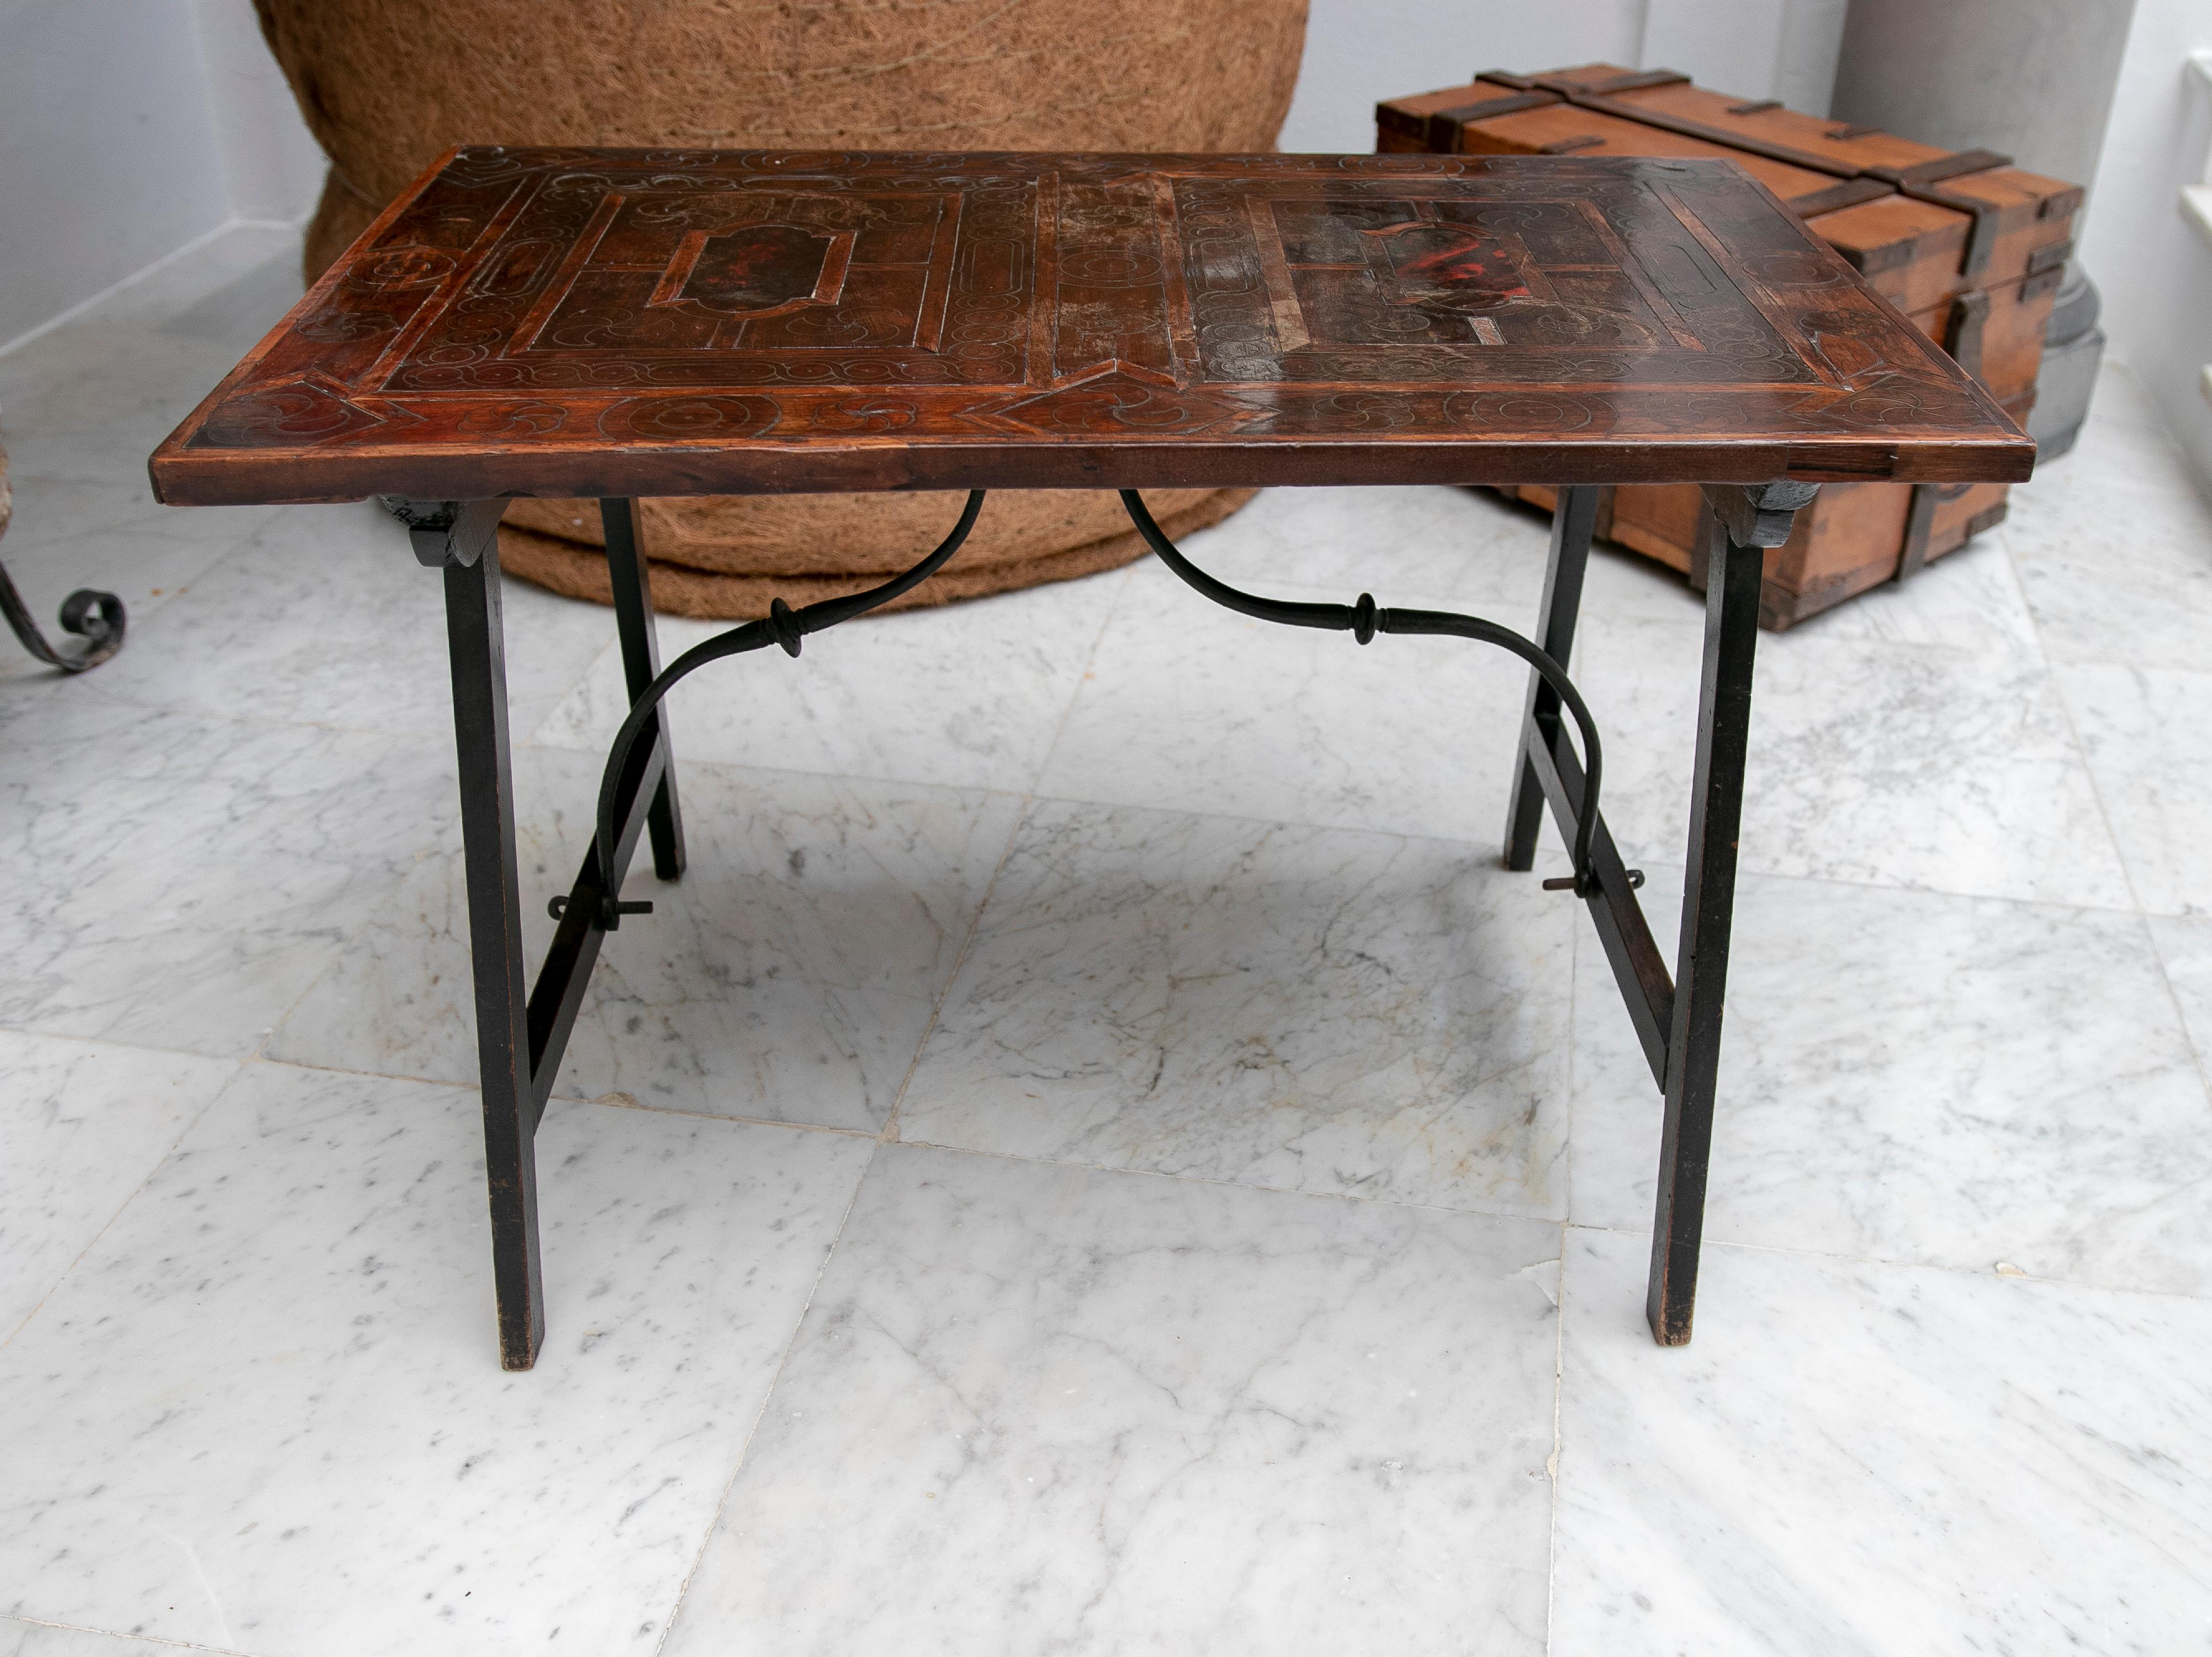 17th Century Spanish Wooden Table with Inlays 12